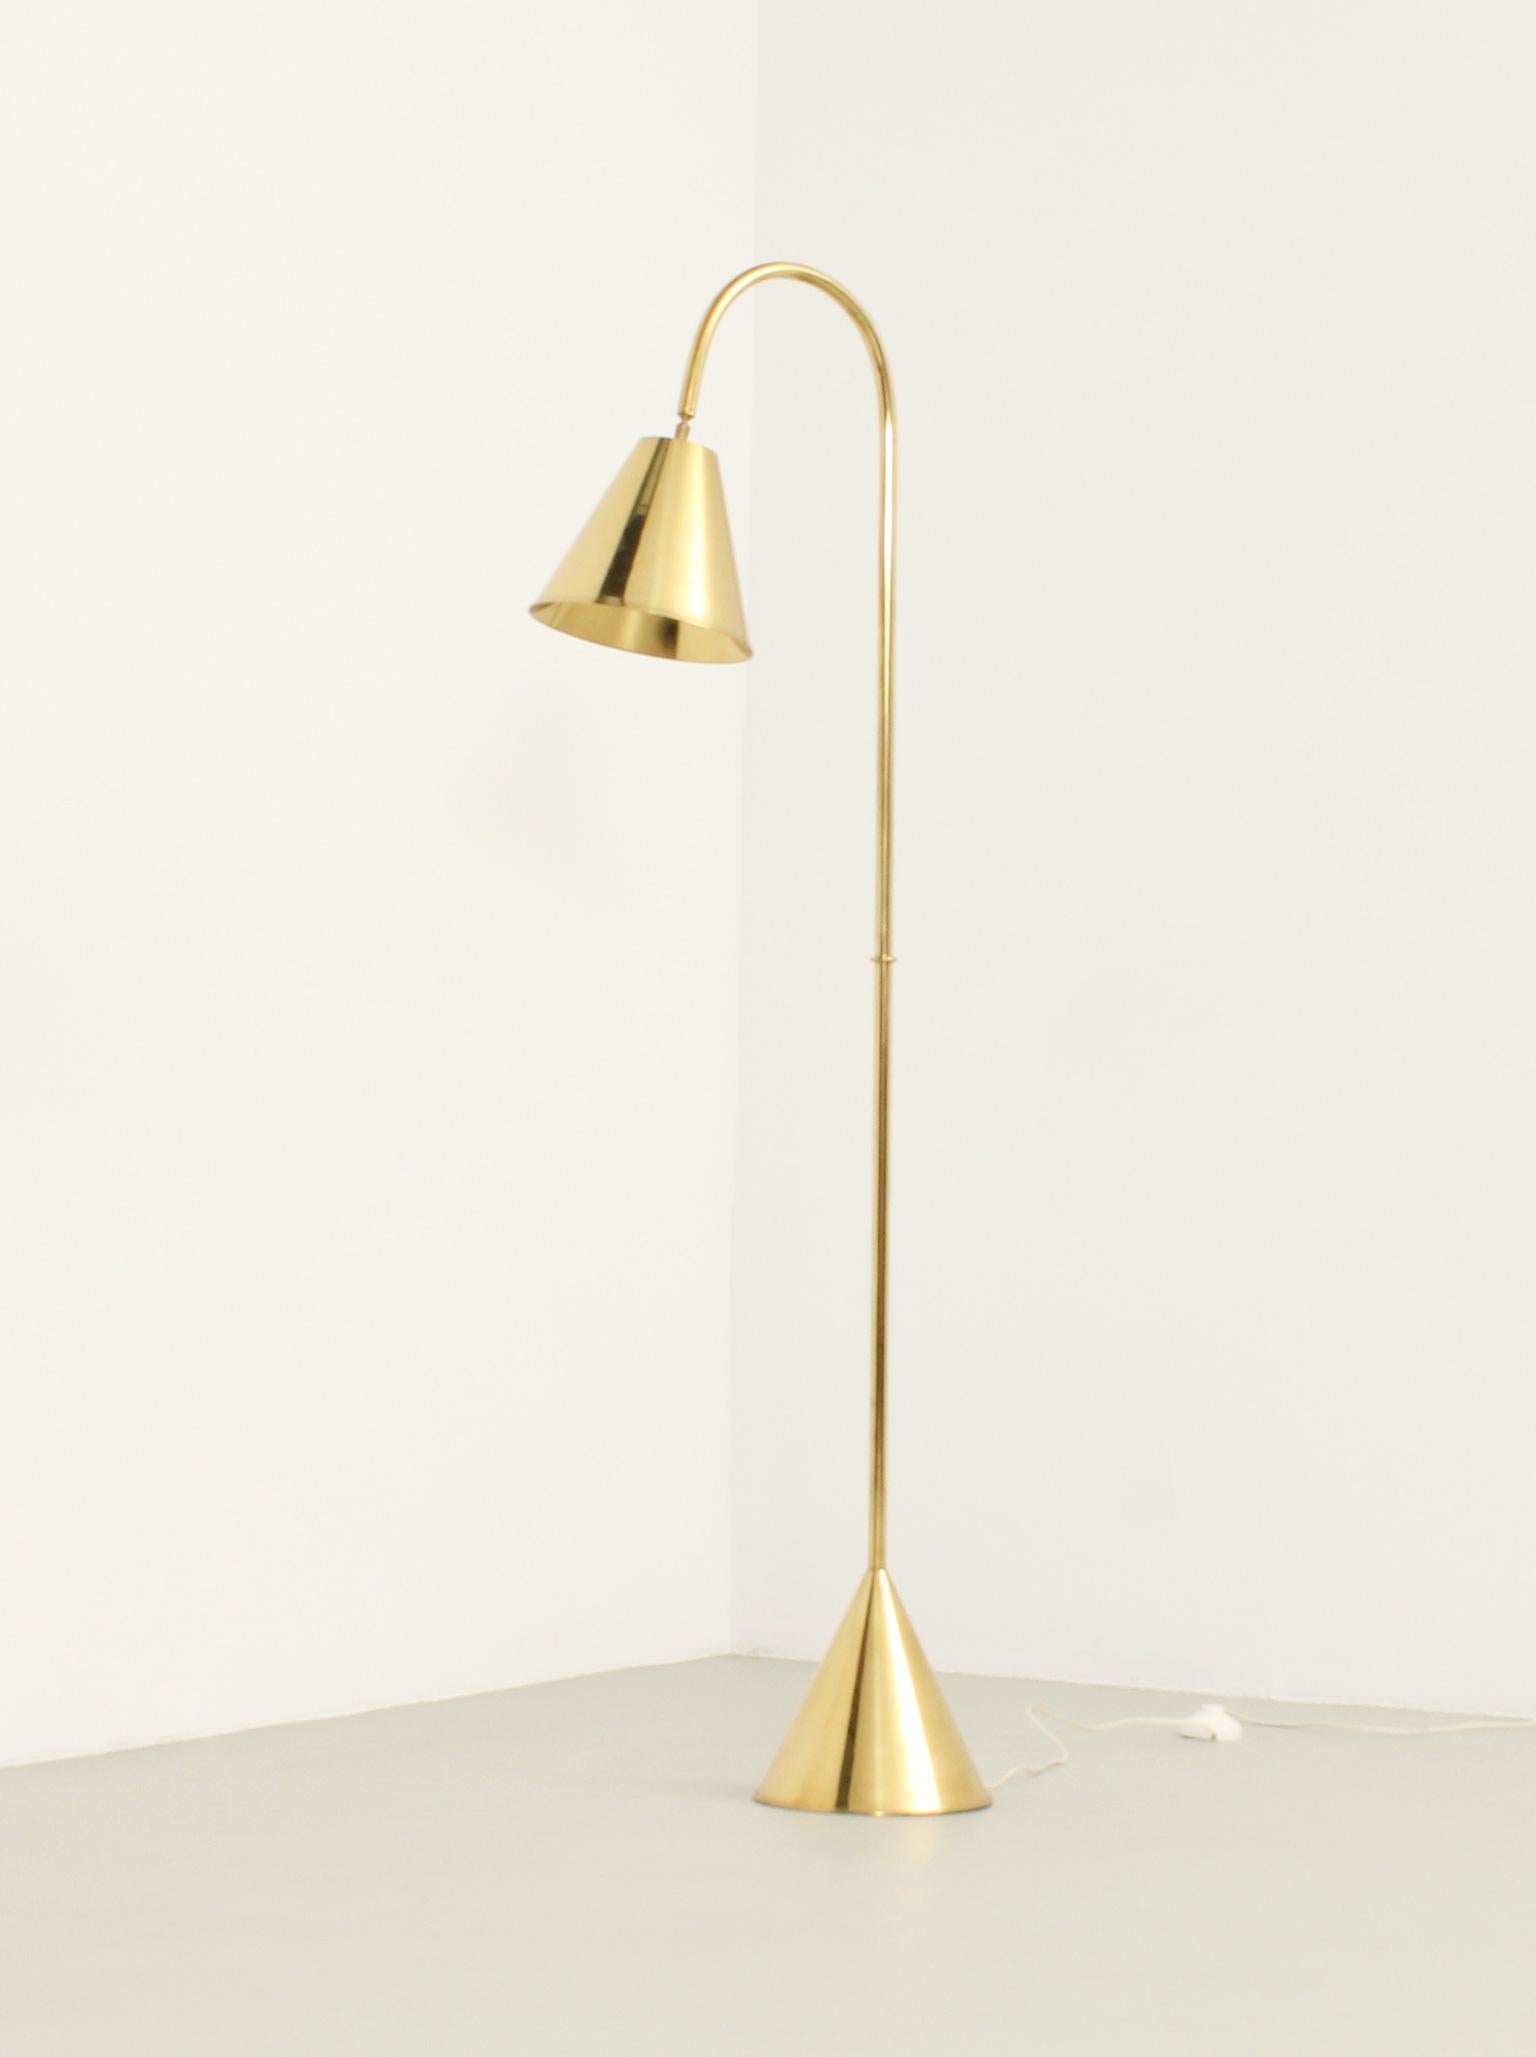 Floor lamp produced in 1950's by Valenti, Spain. Rare edition entirely in brass with ball joint that allows movement of the shade. Signed.